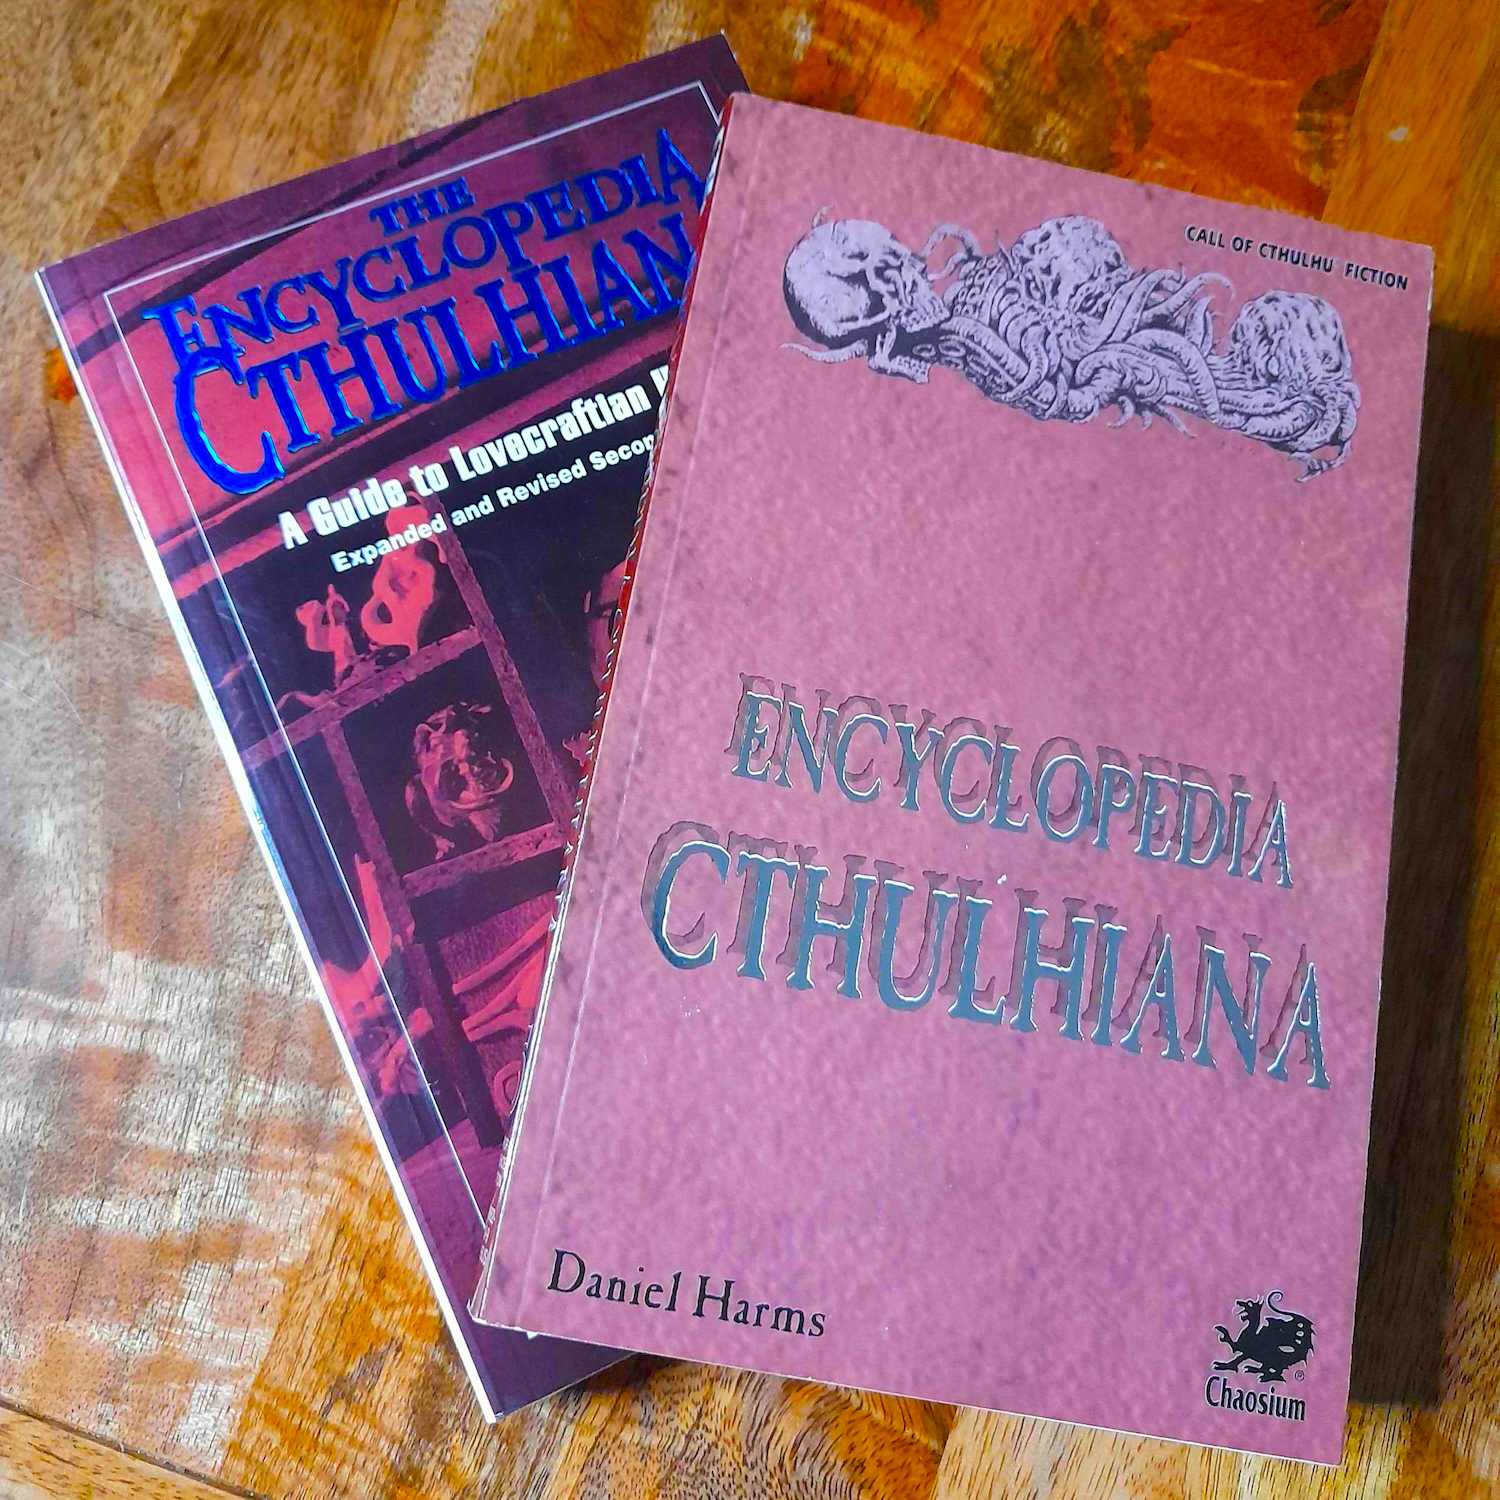 The two previous Chaosium editions of Encyclopedia Cthulhiana (front 1994 edition, back 2008 edition)